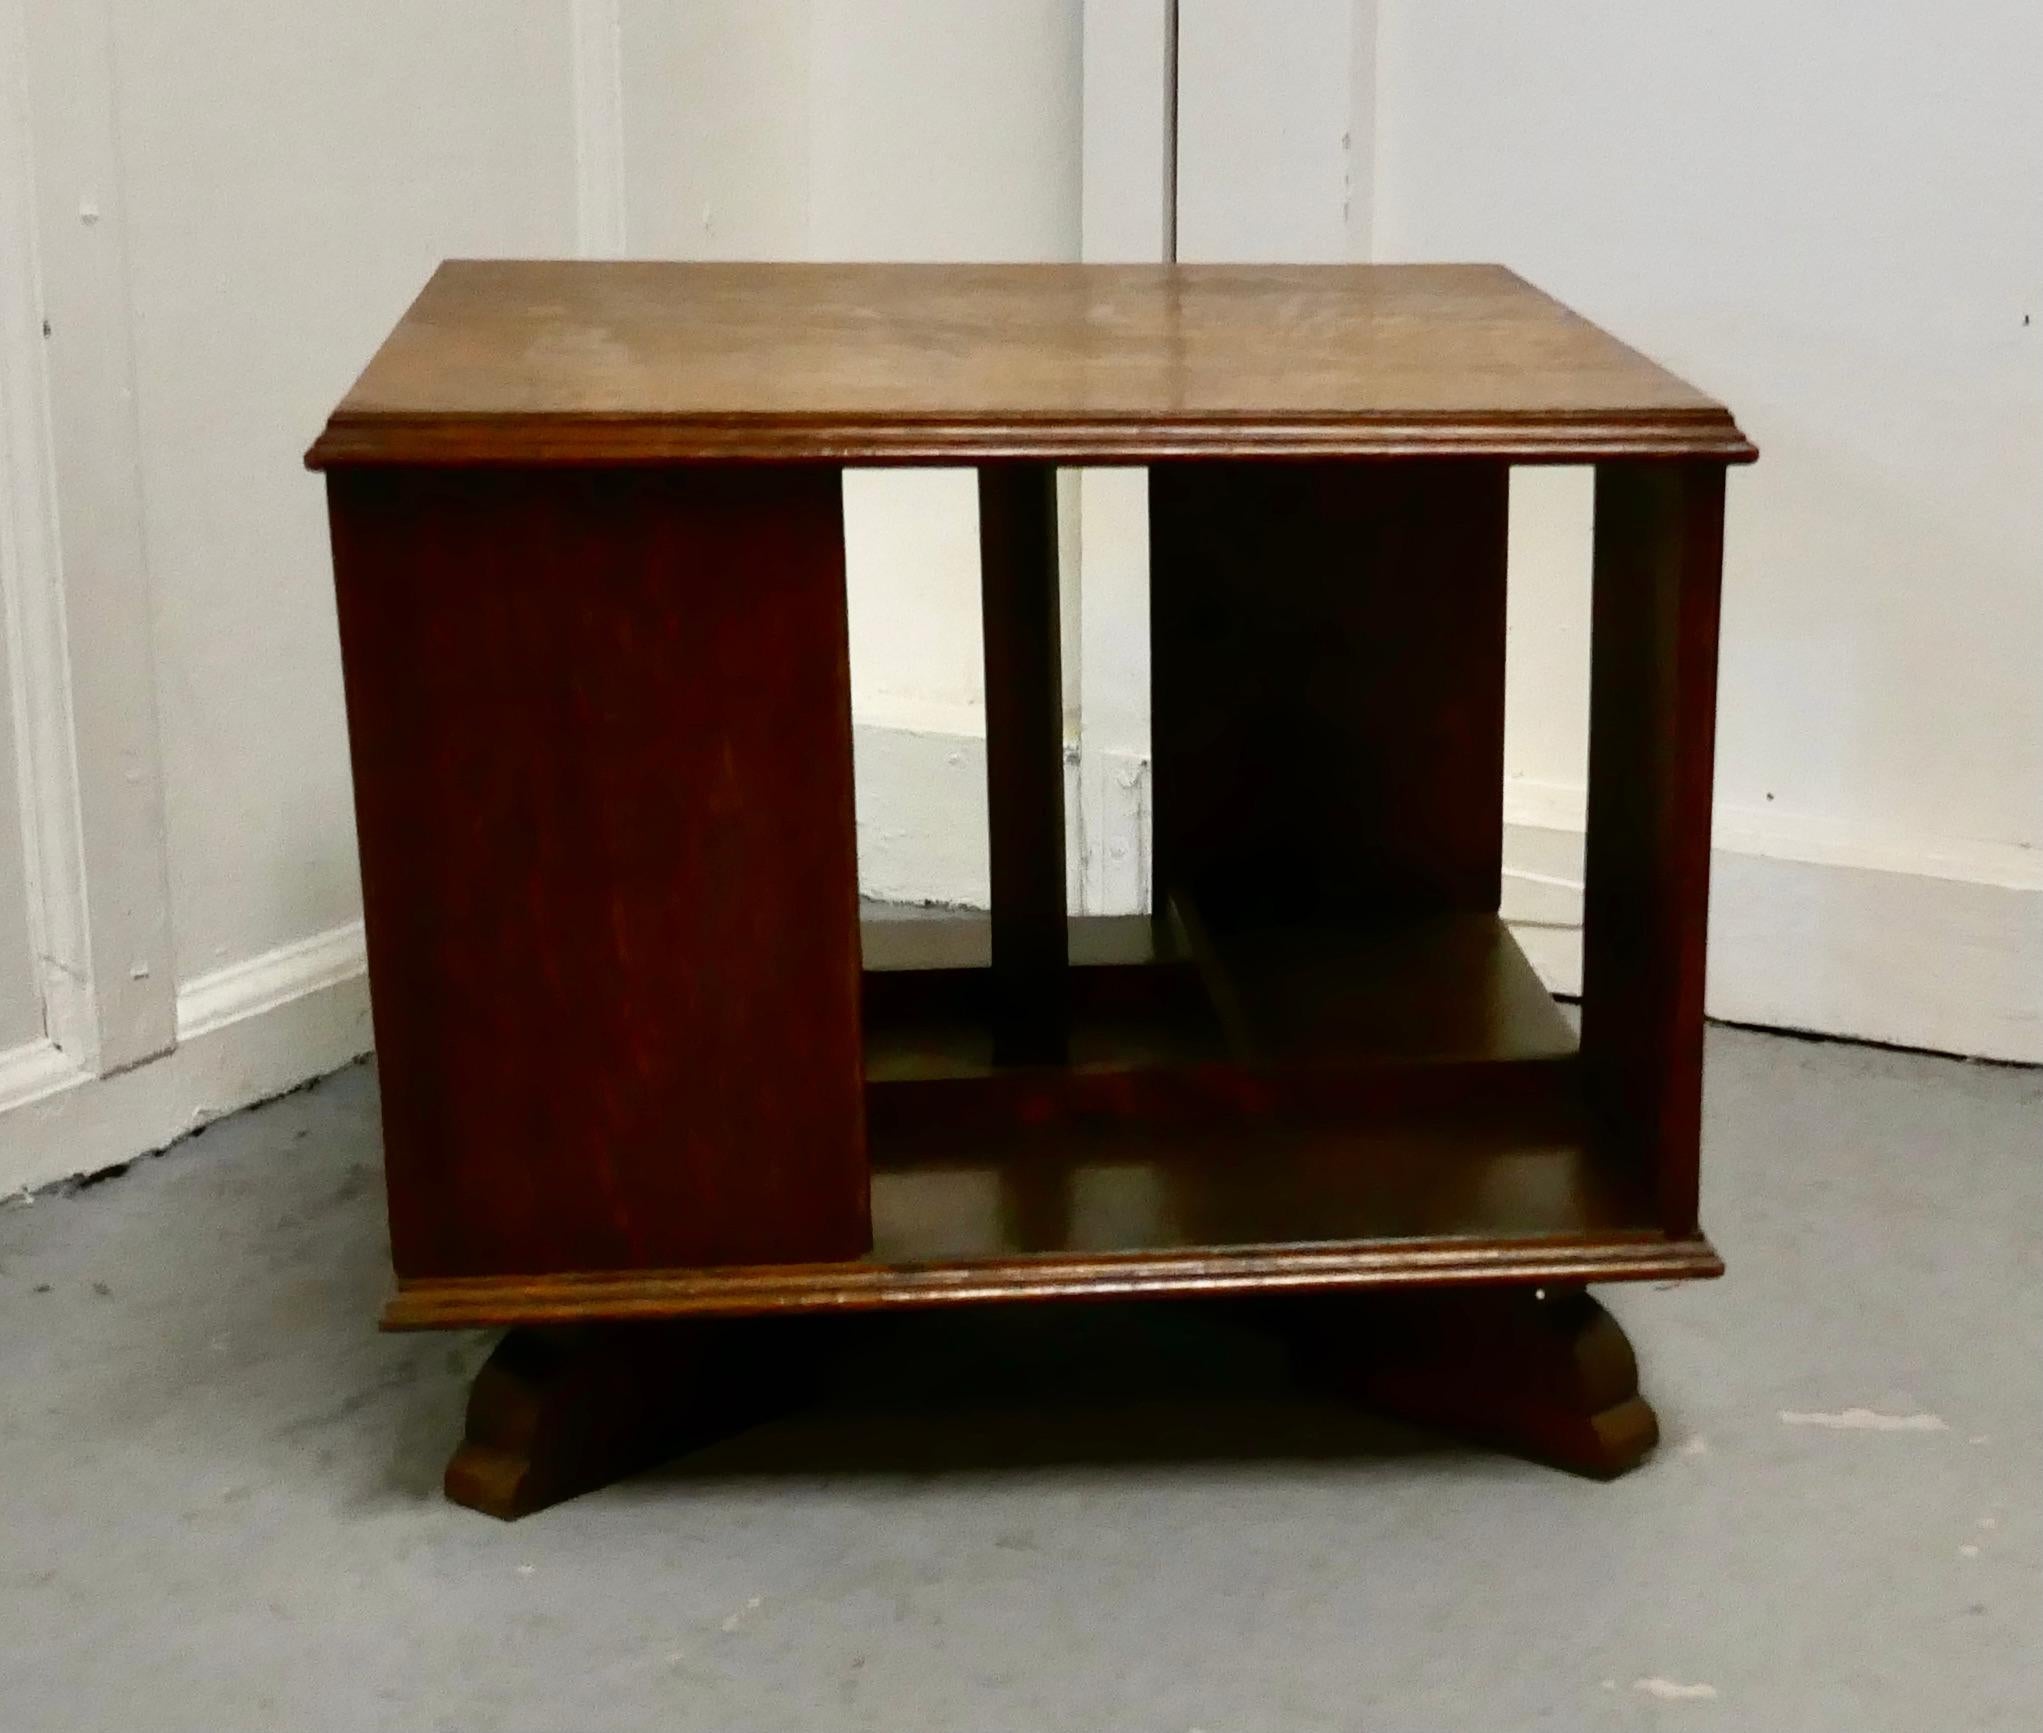 Table top oak revolving bookcase

The bookcase is made in Oak and is of excellent Quality it has wide access on all 4 sides 
The bookcase is in excellent working condition, a good useful piece, and can be used a s a low table or on a table top